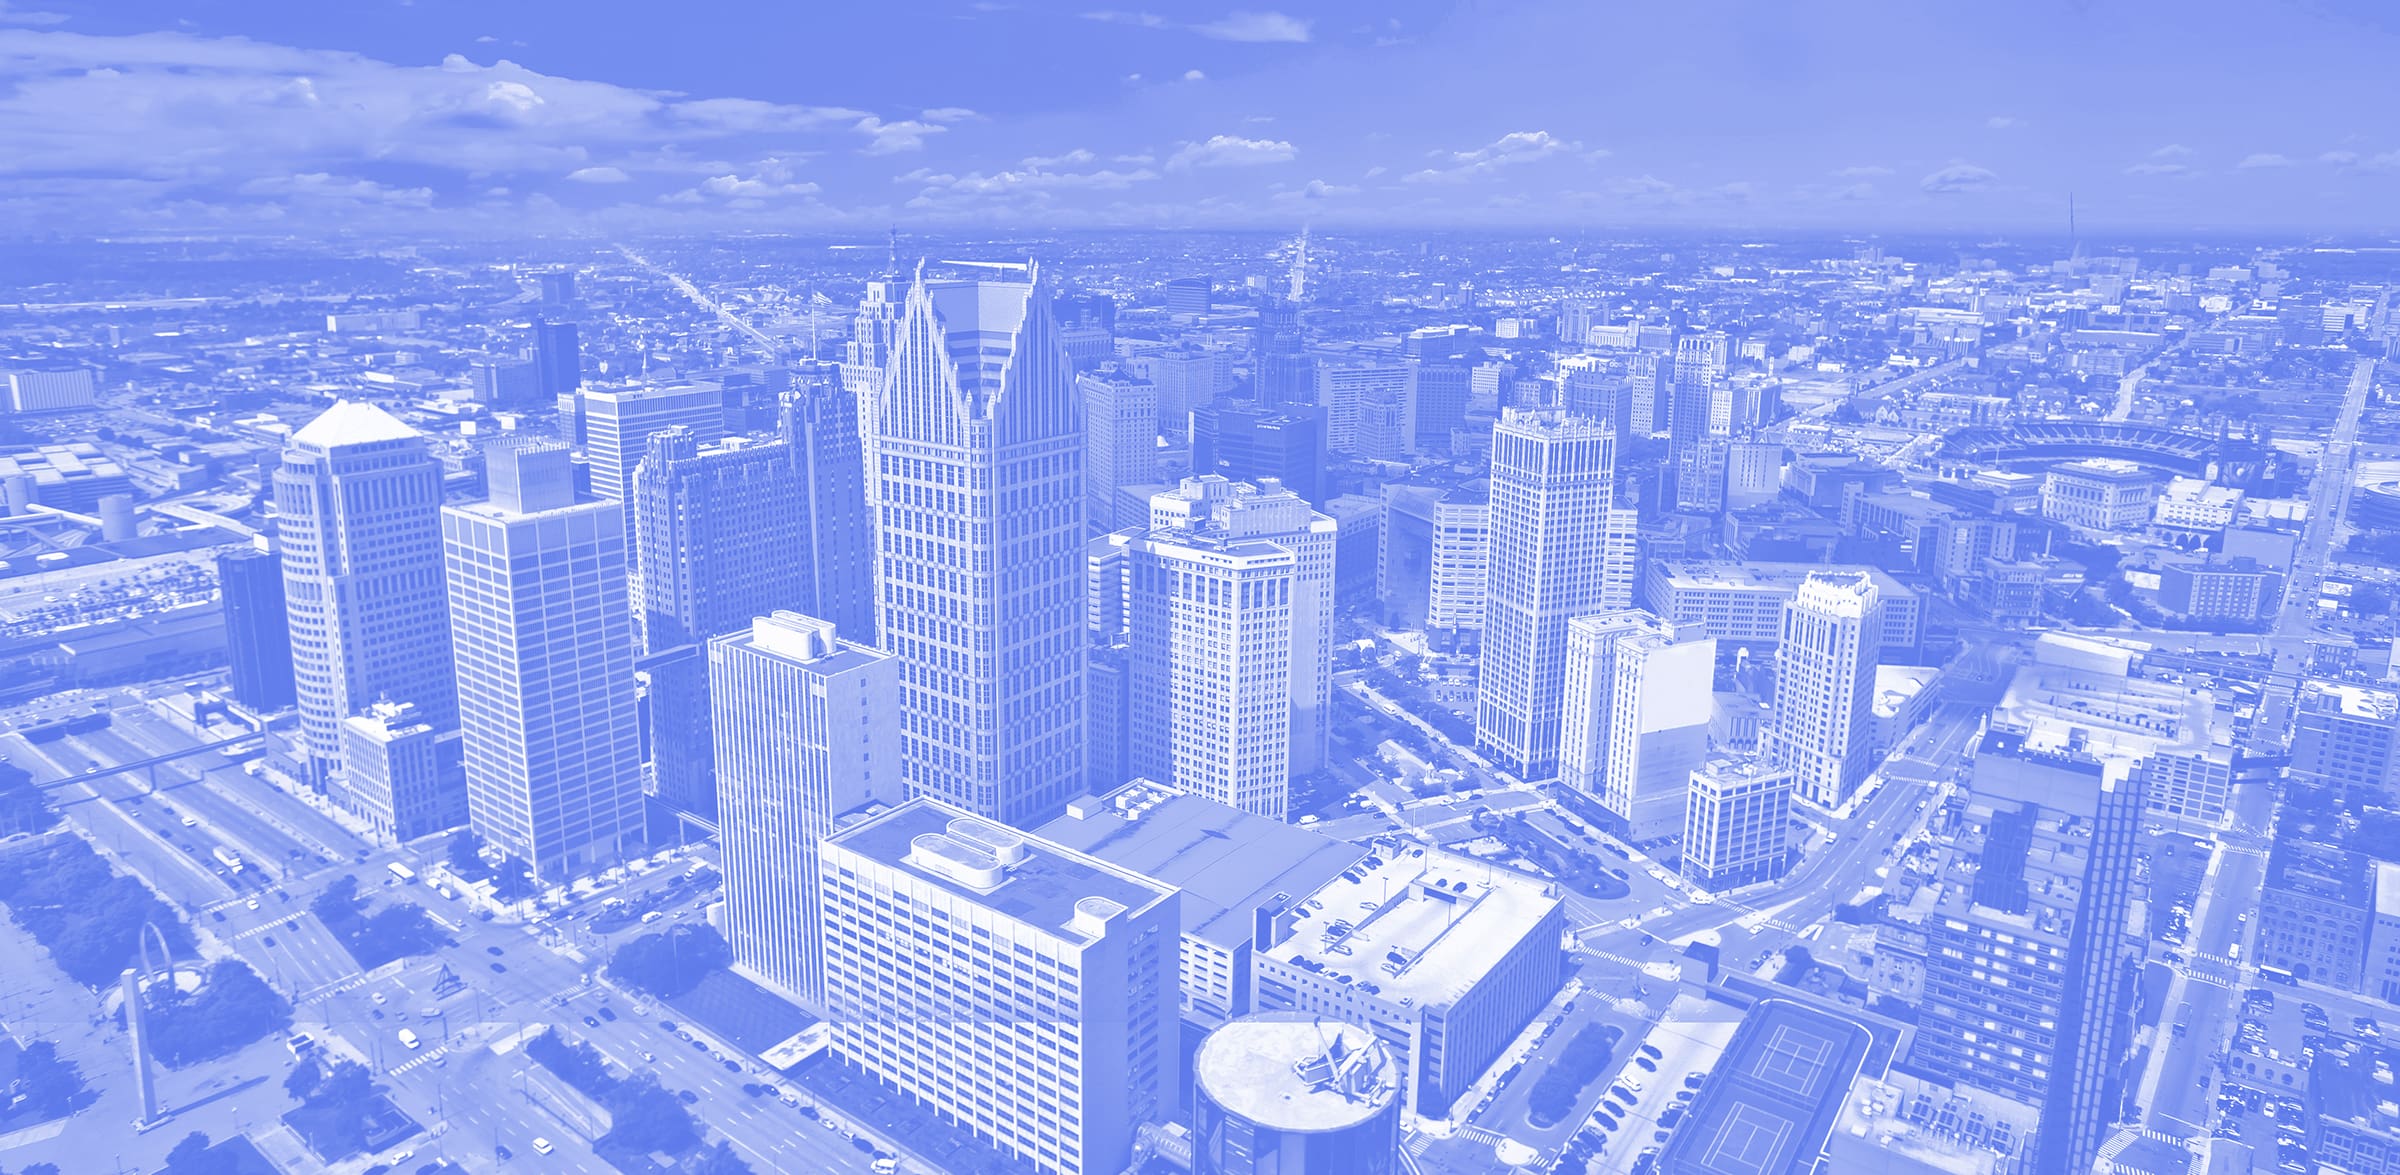 Image of detroit with a blue filter over it